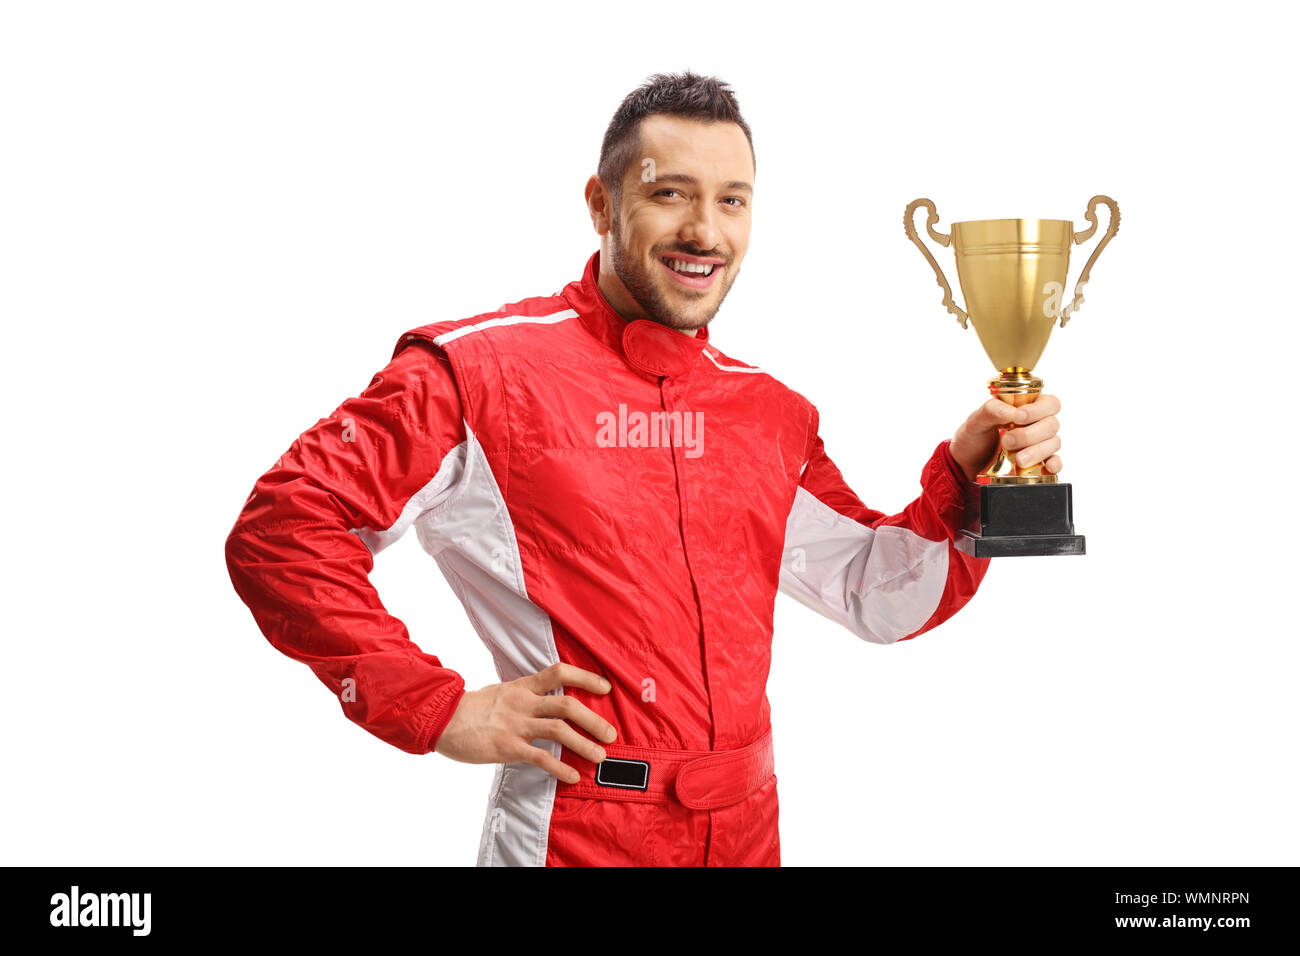 Formula champion holding a gold trophy cup isolated on white background Stock Photo